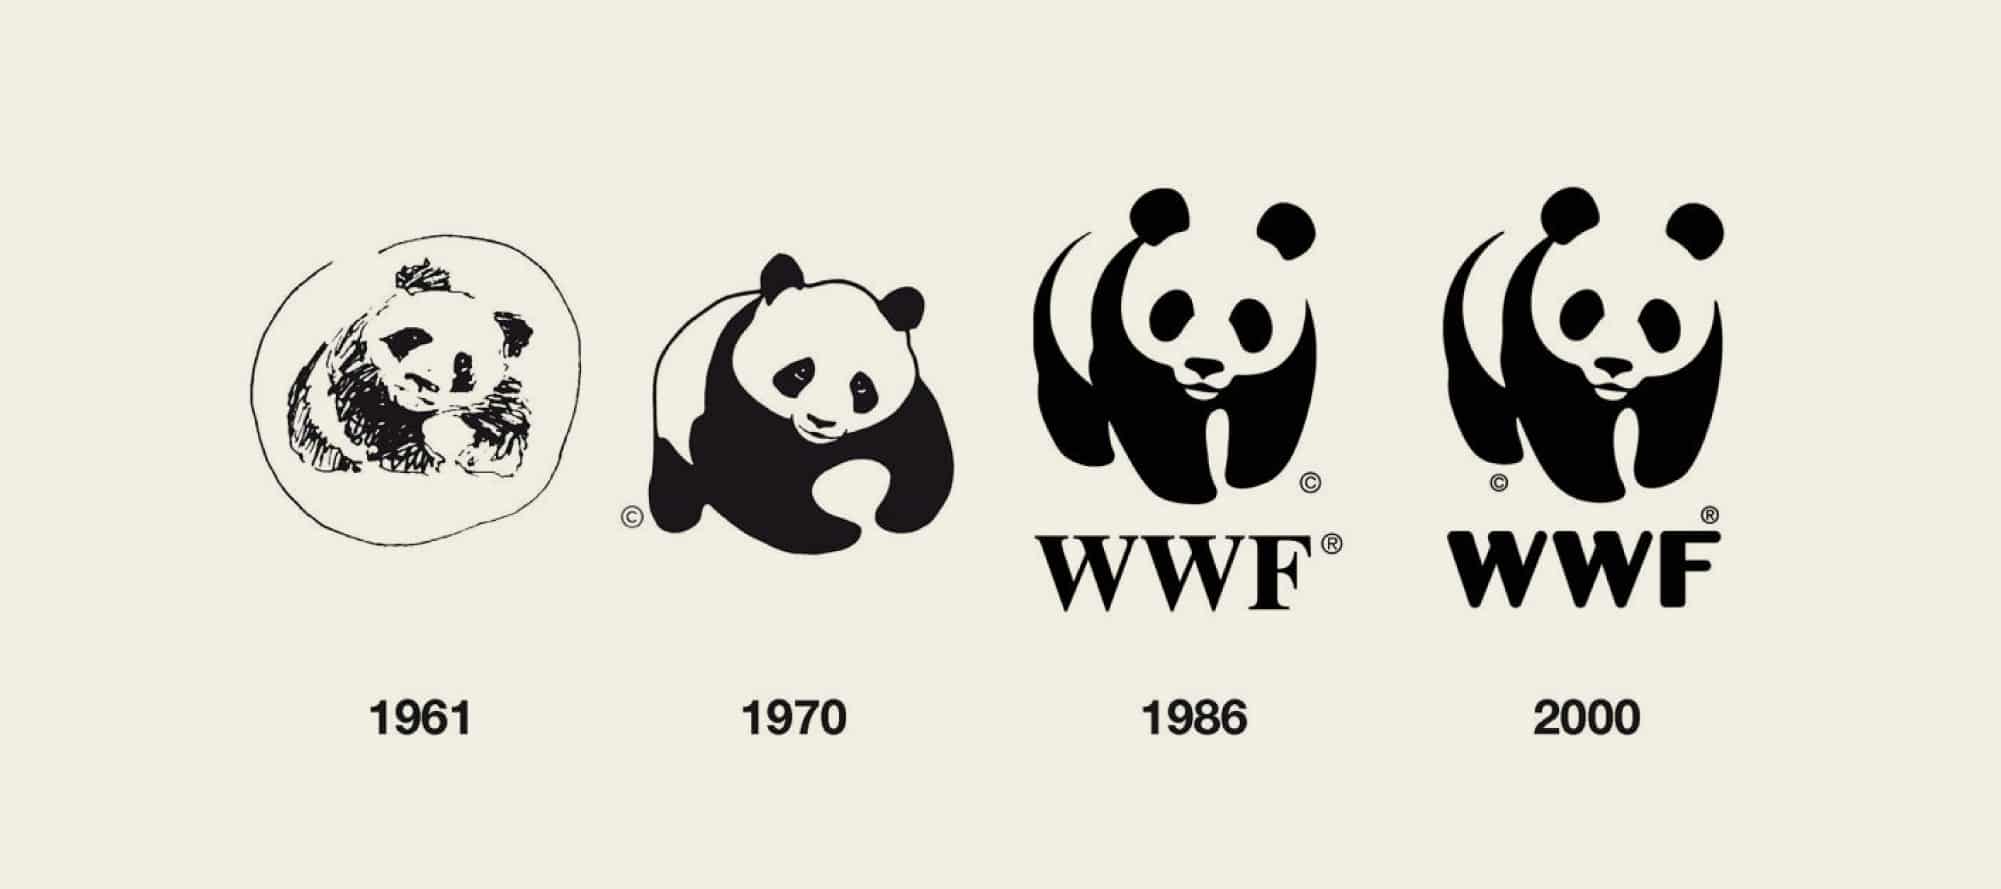 A timeline showing how the WWF nonprofit logo has evolved in its design from 1961 to today.